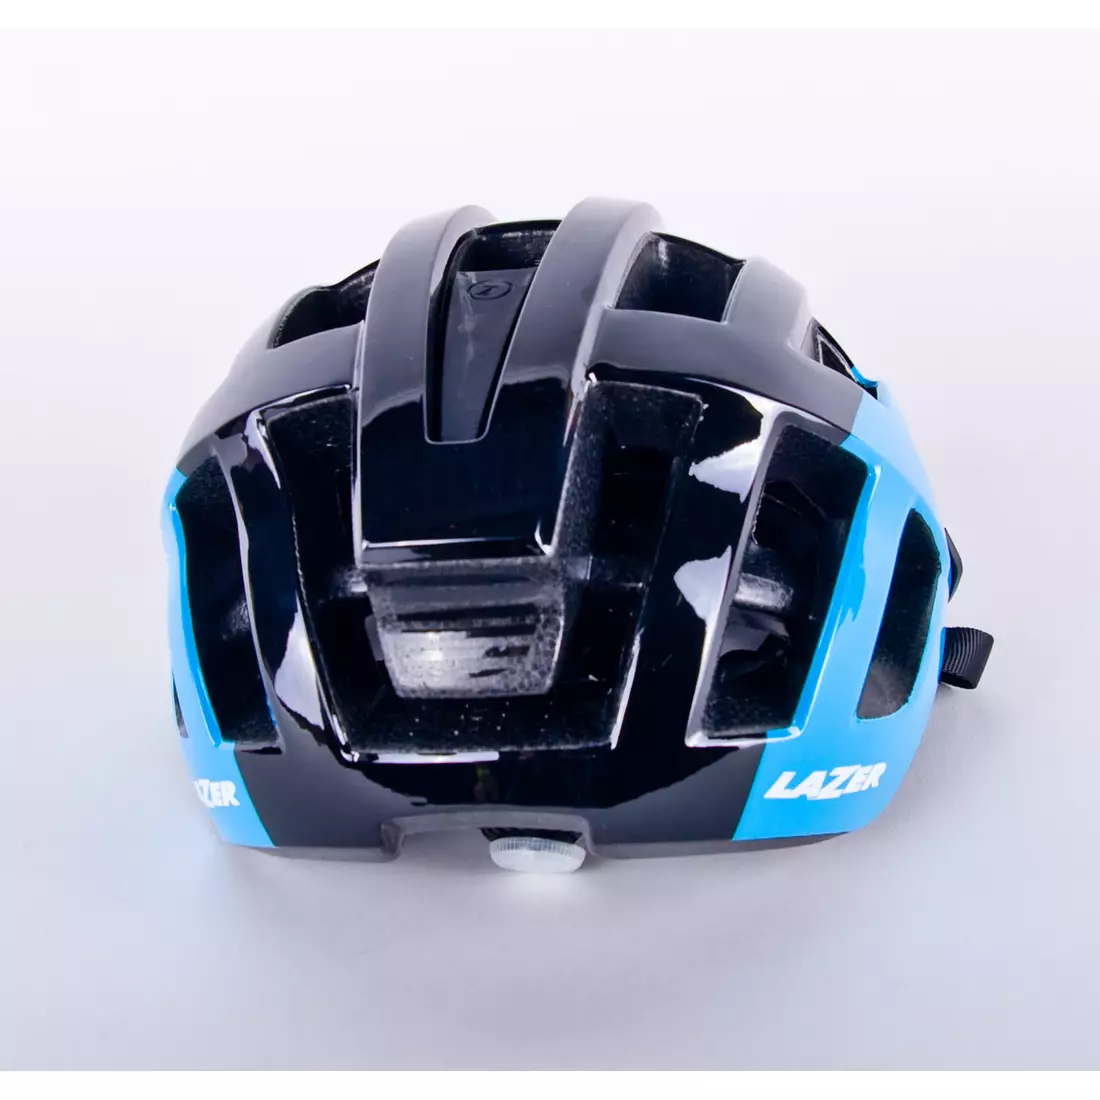 LAZER Compact DLX bicycle helmet LED insect net blue black glossy